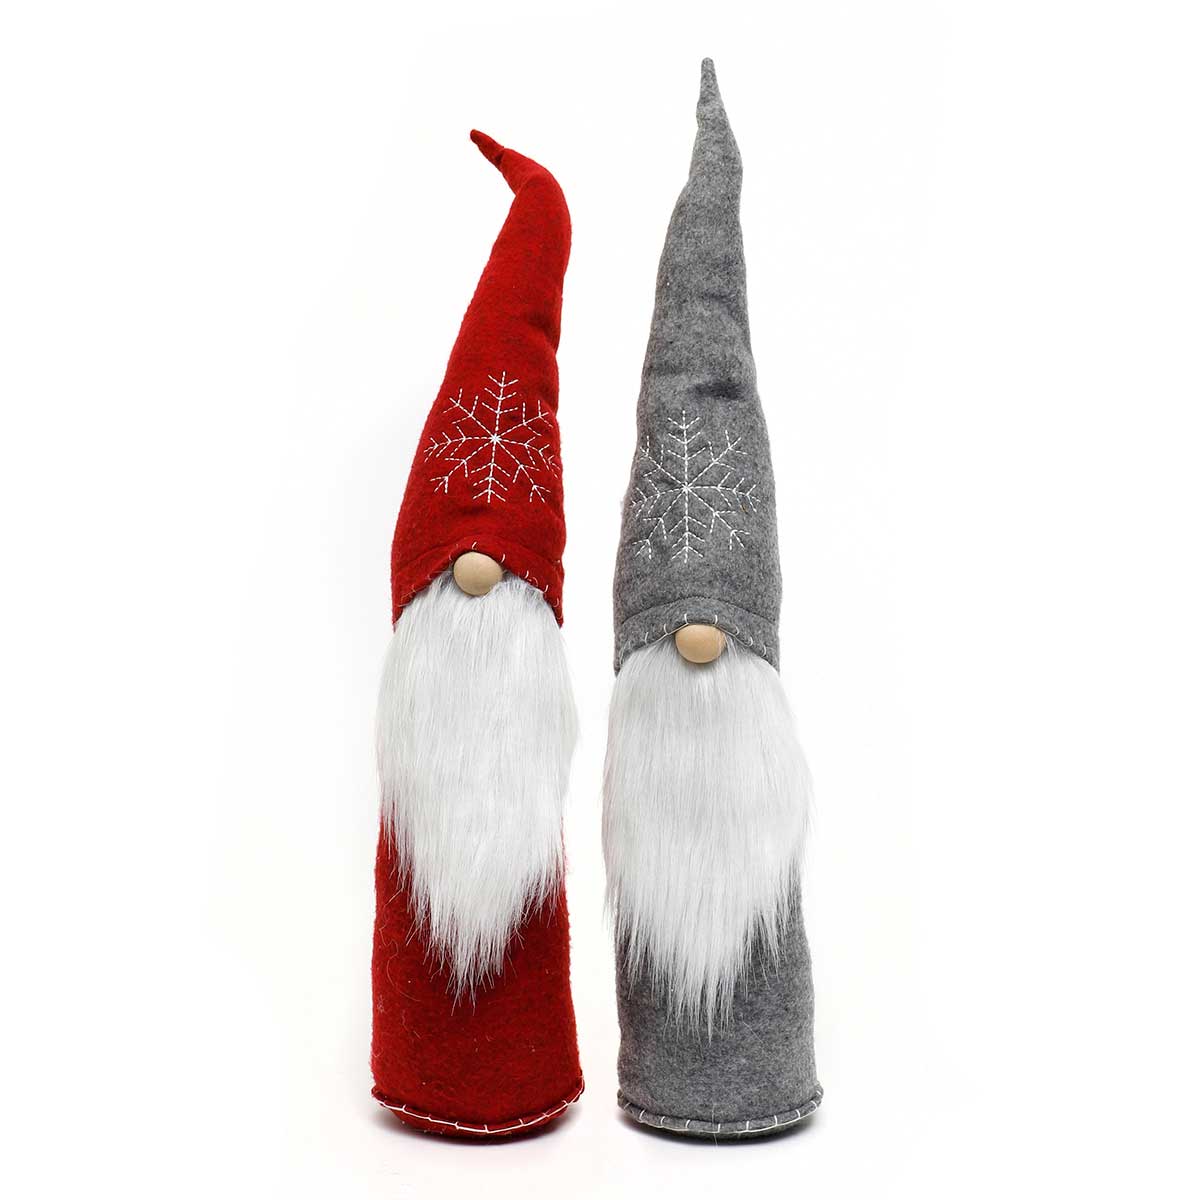 SCHNITZEL GNOME WITH SNOWFLAKE HAT, WOOD NOSE, CURLY BEARD WITH